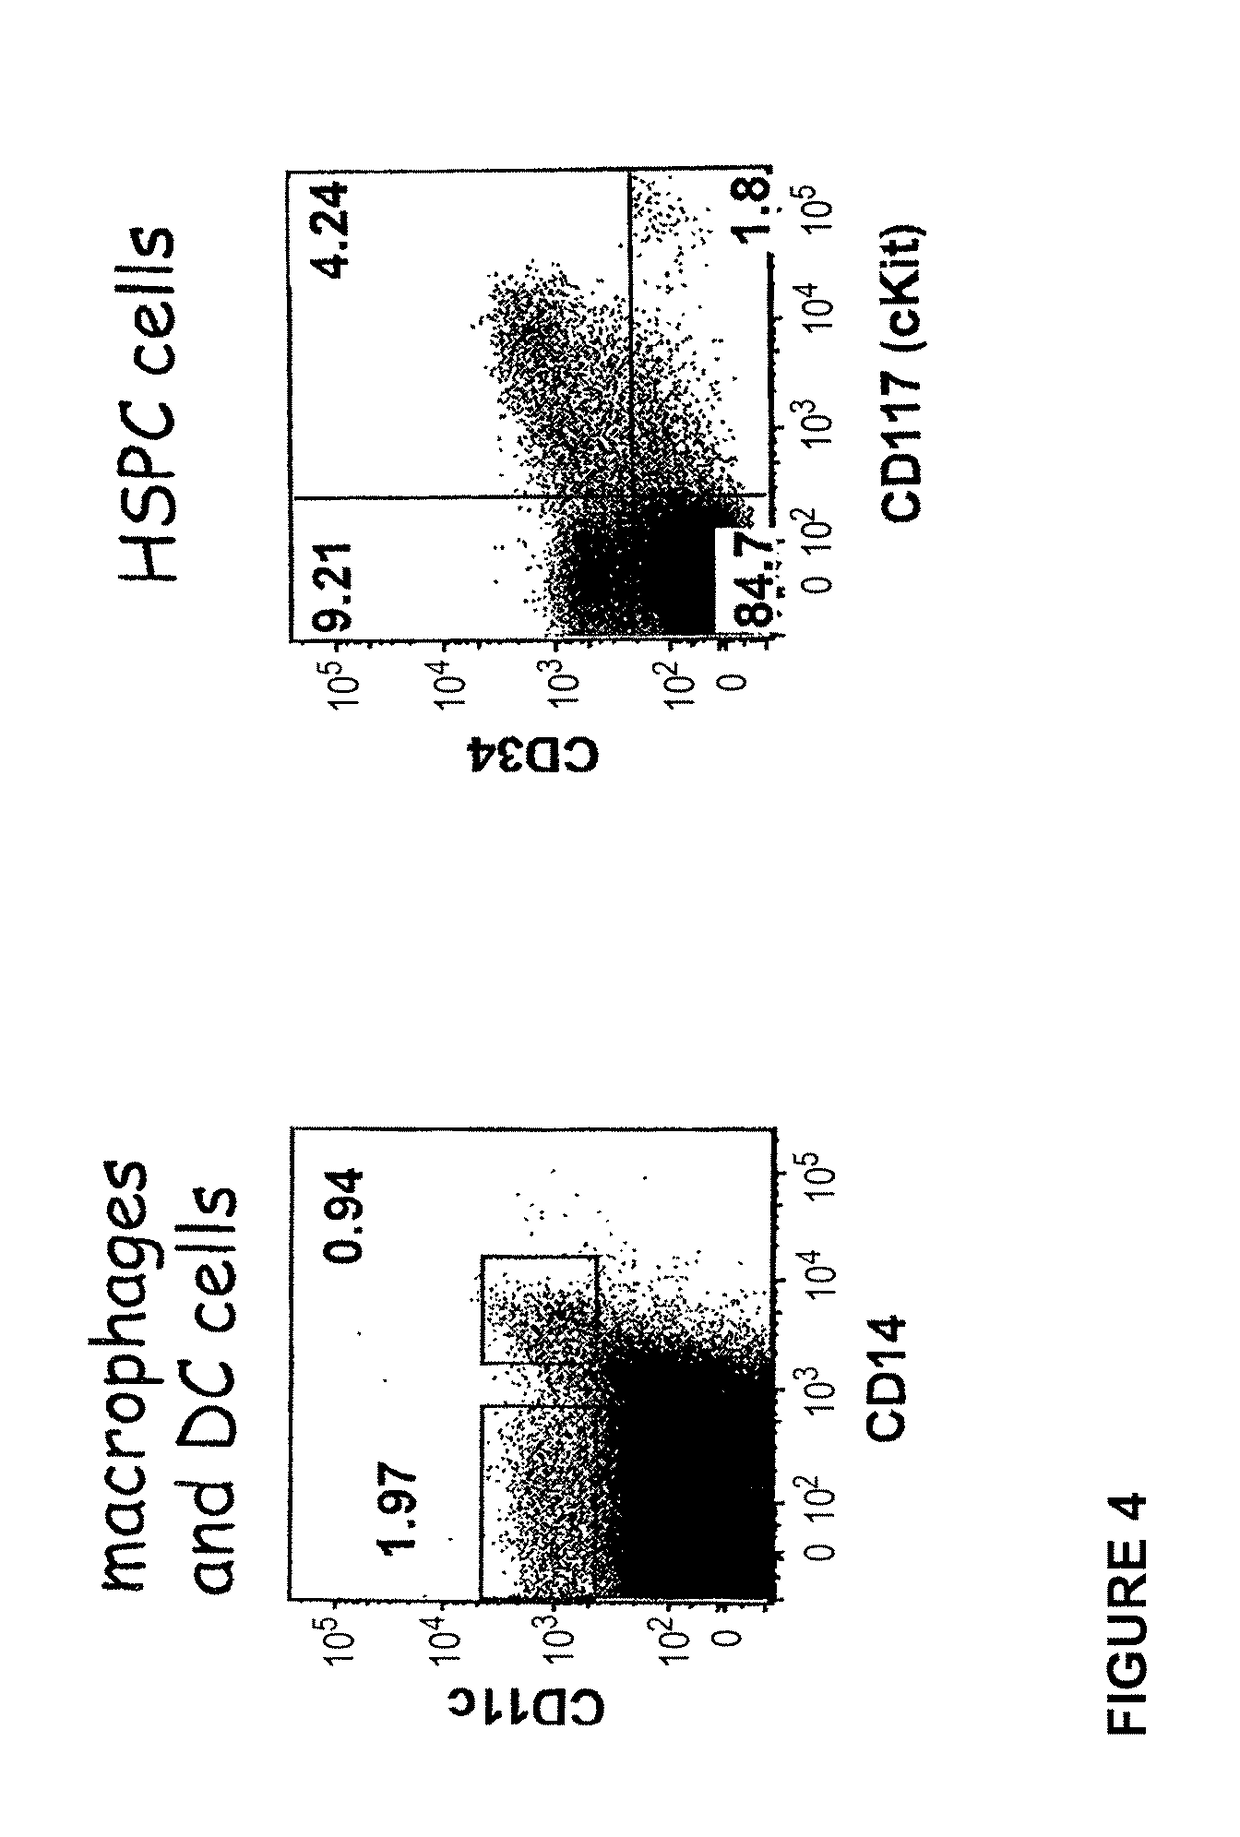 Transgenic immunodeficient mouse expressing human SIRP-alpha